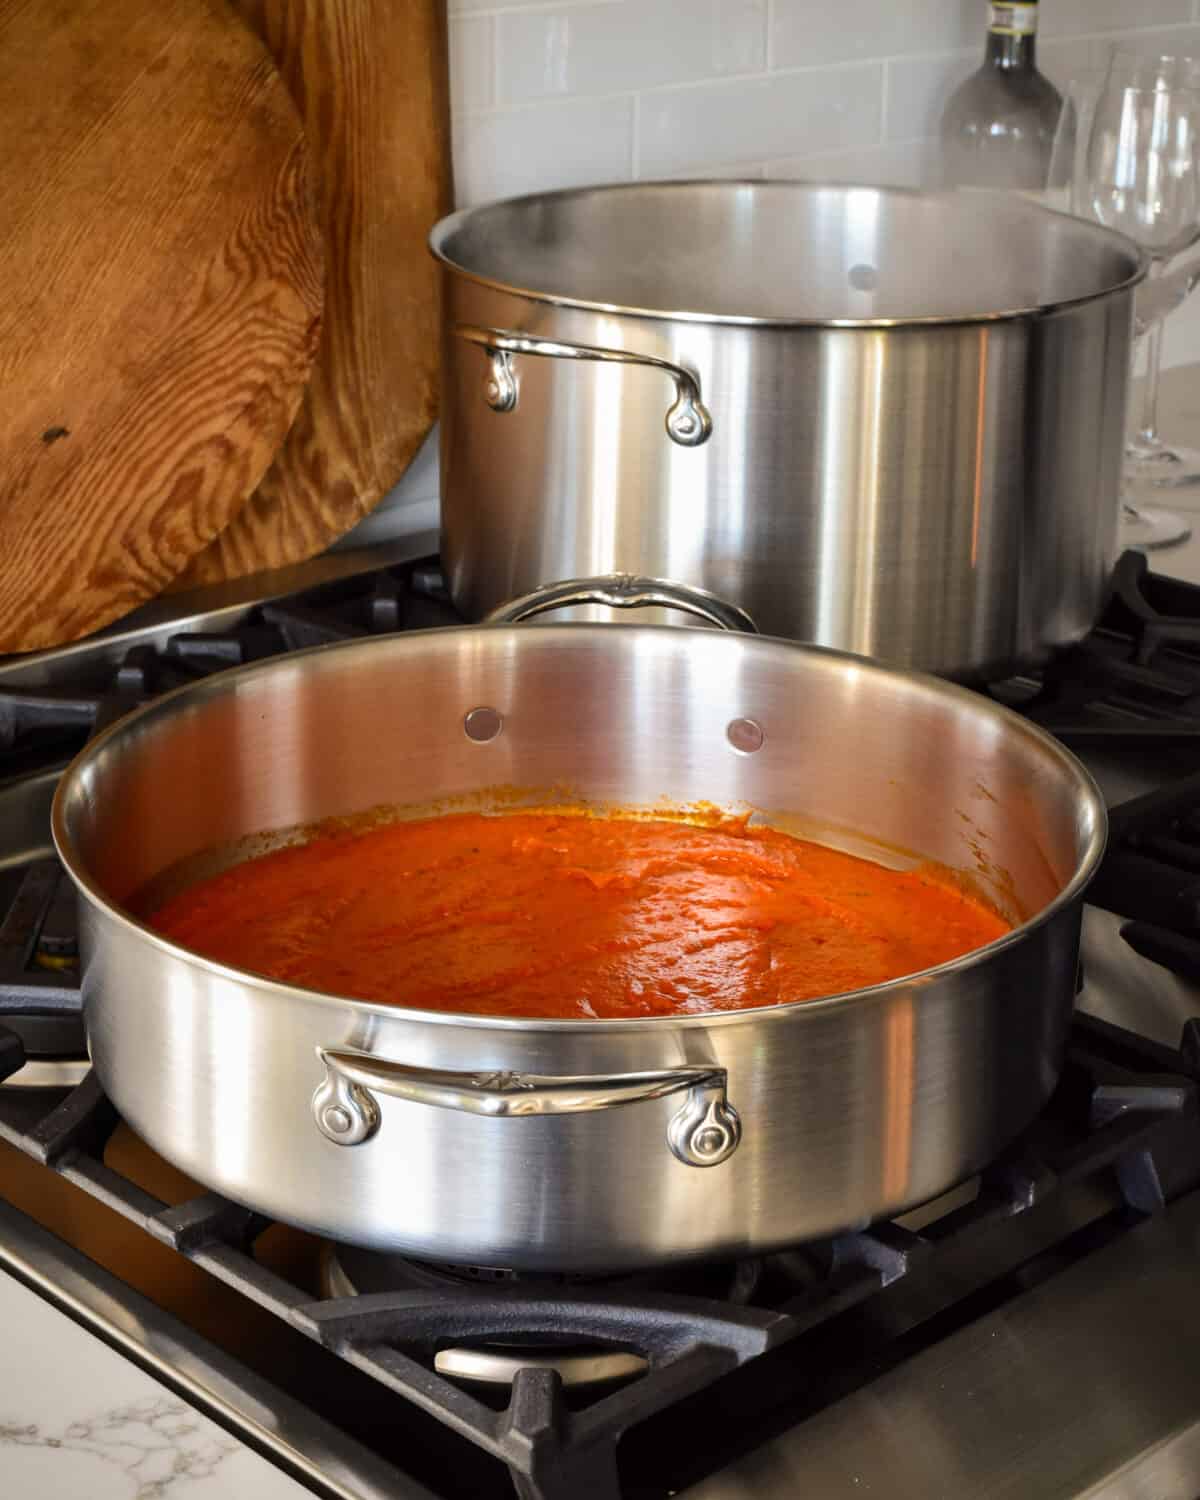 A rondeau and stock pot on the stove with a red sauce in the rondeau.